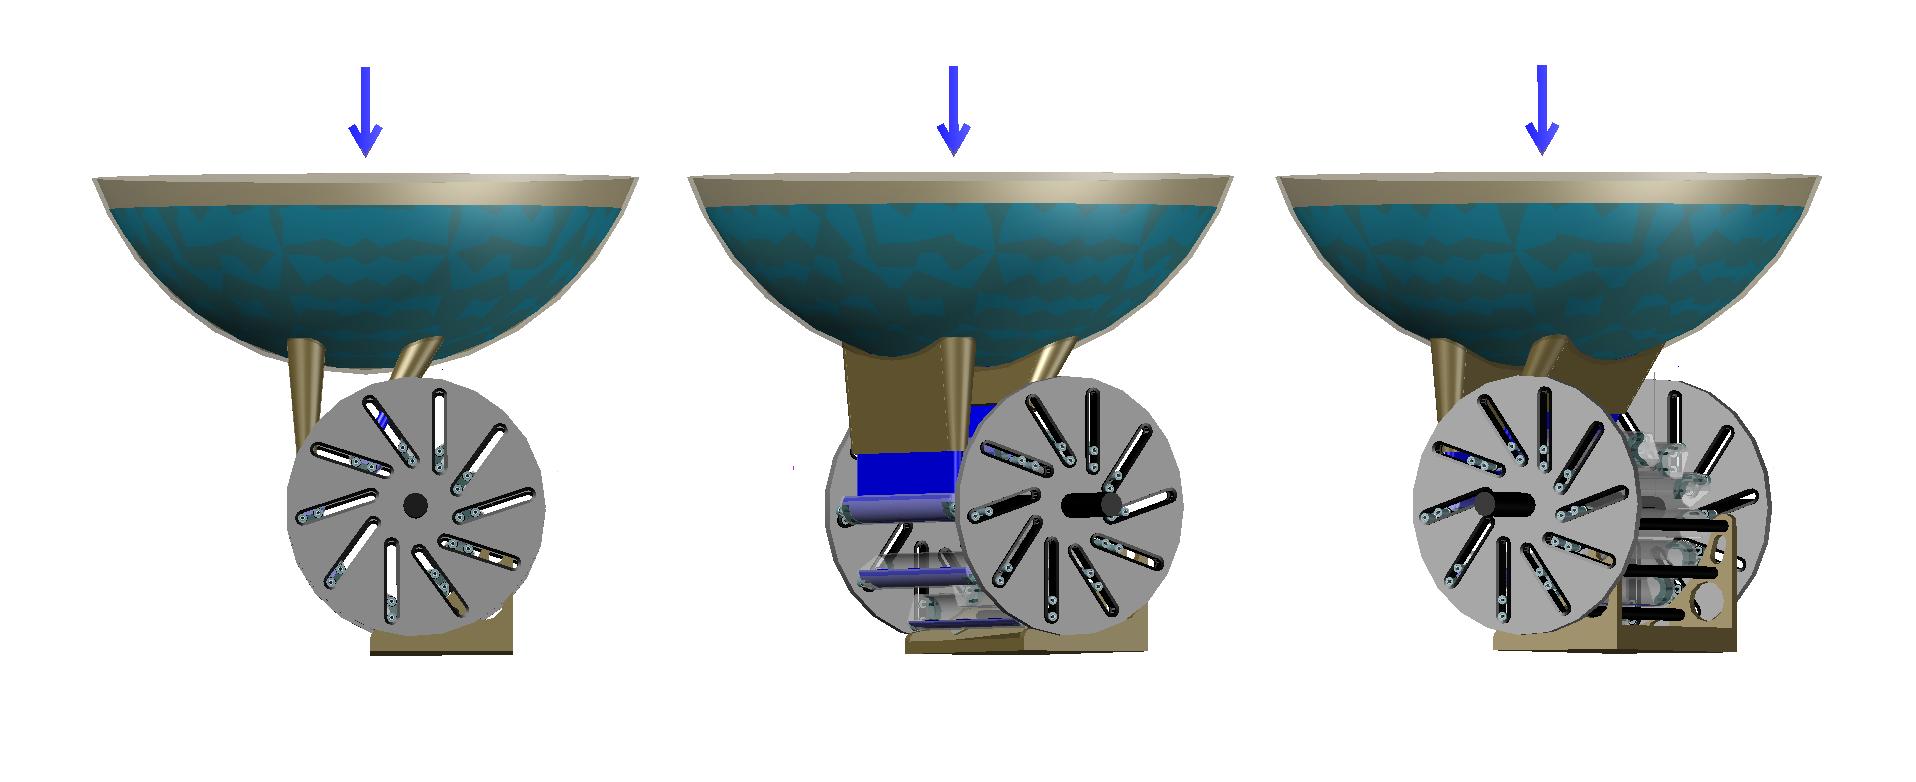 The appearance of this variant of design motor rotor, shown in three foreshortenings.